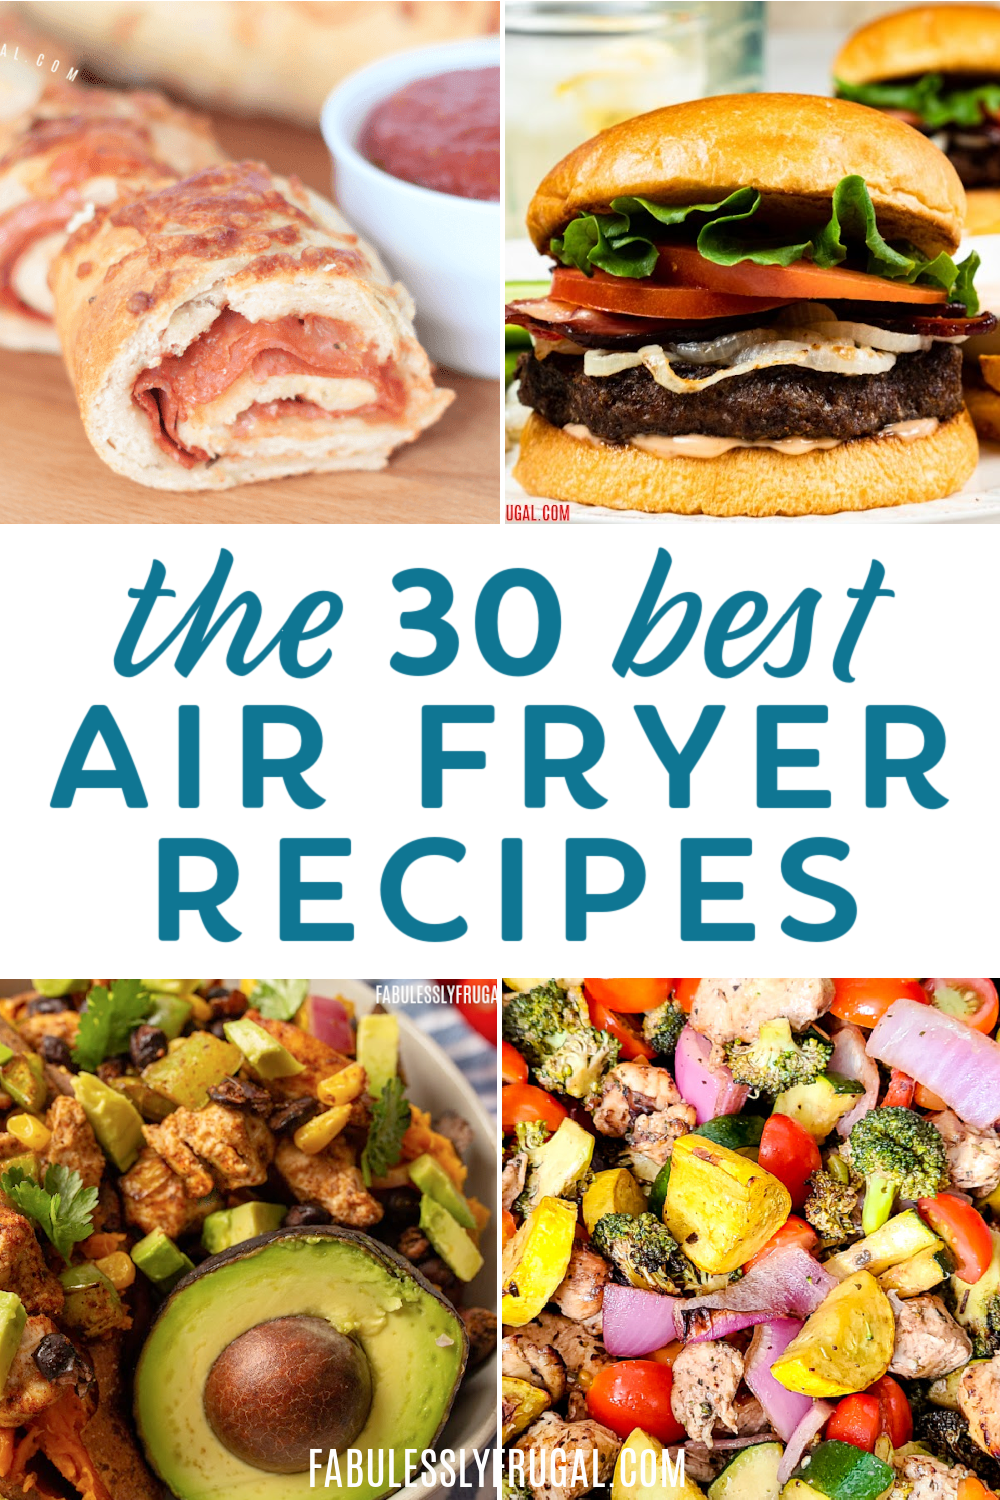 How to make kid-friendly air fryer meals for the whole family - Reviewed